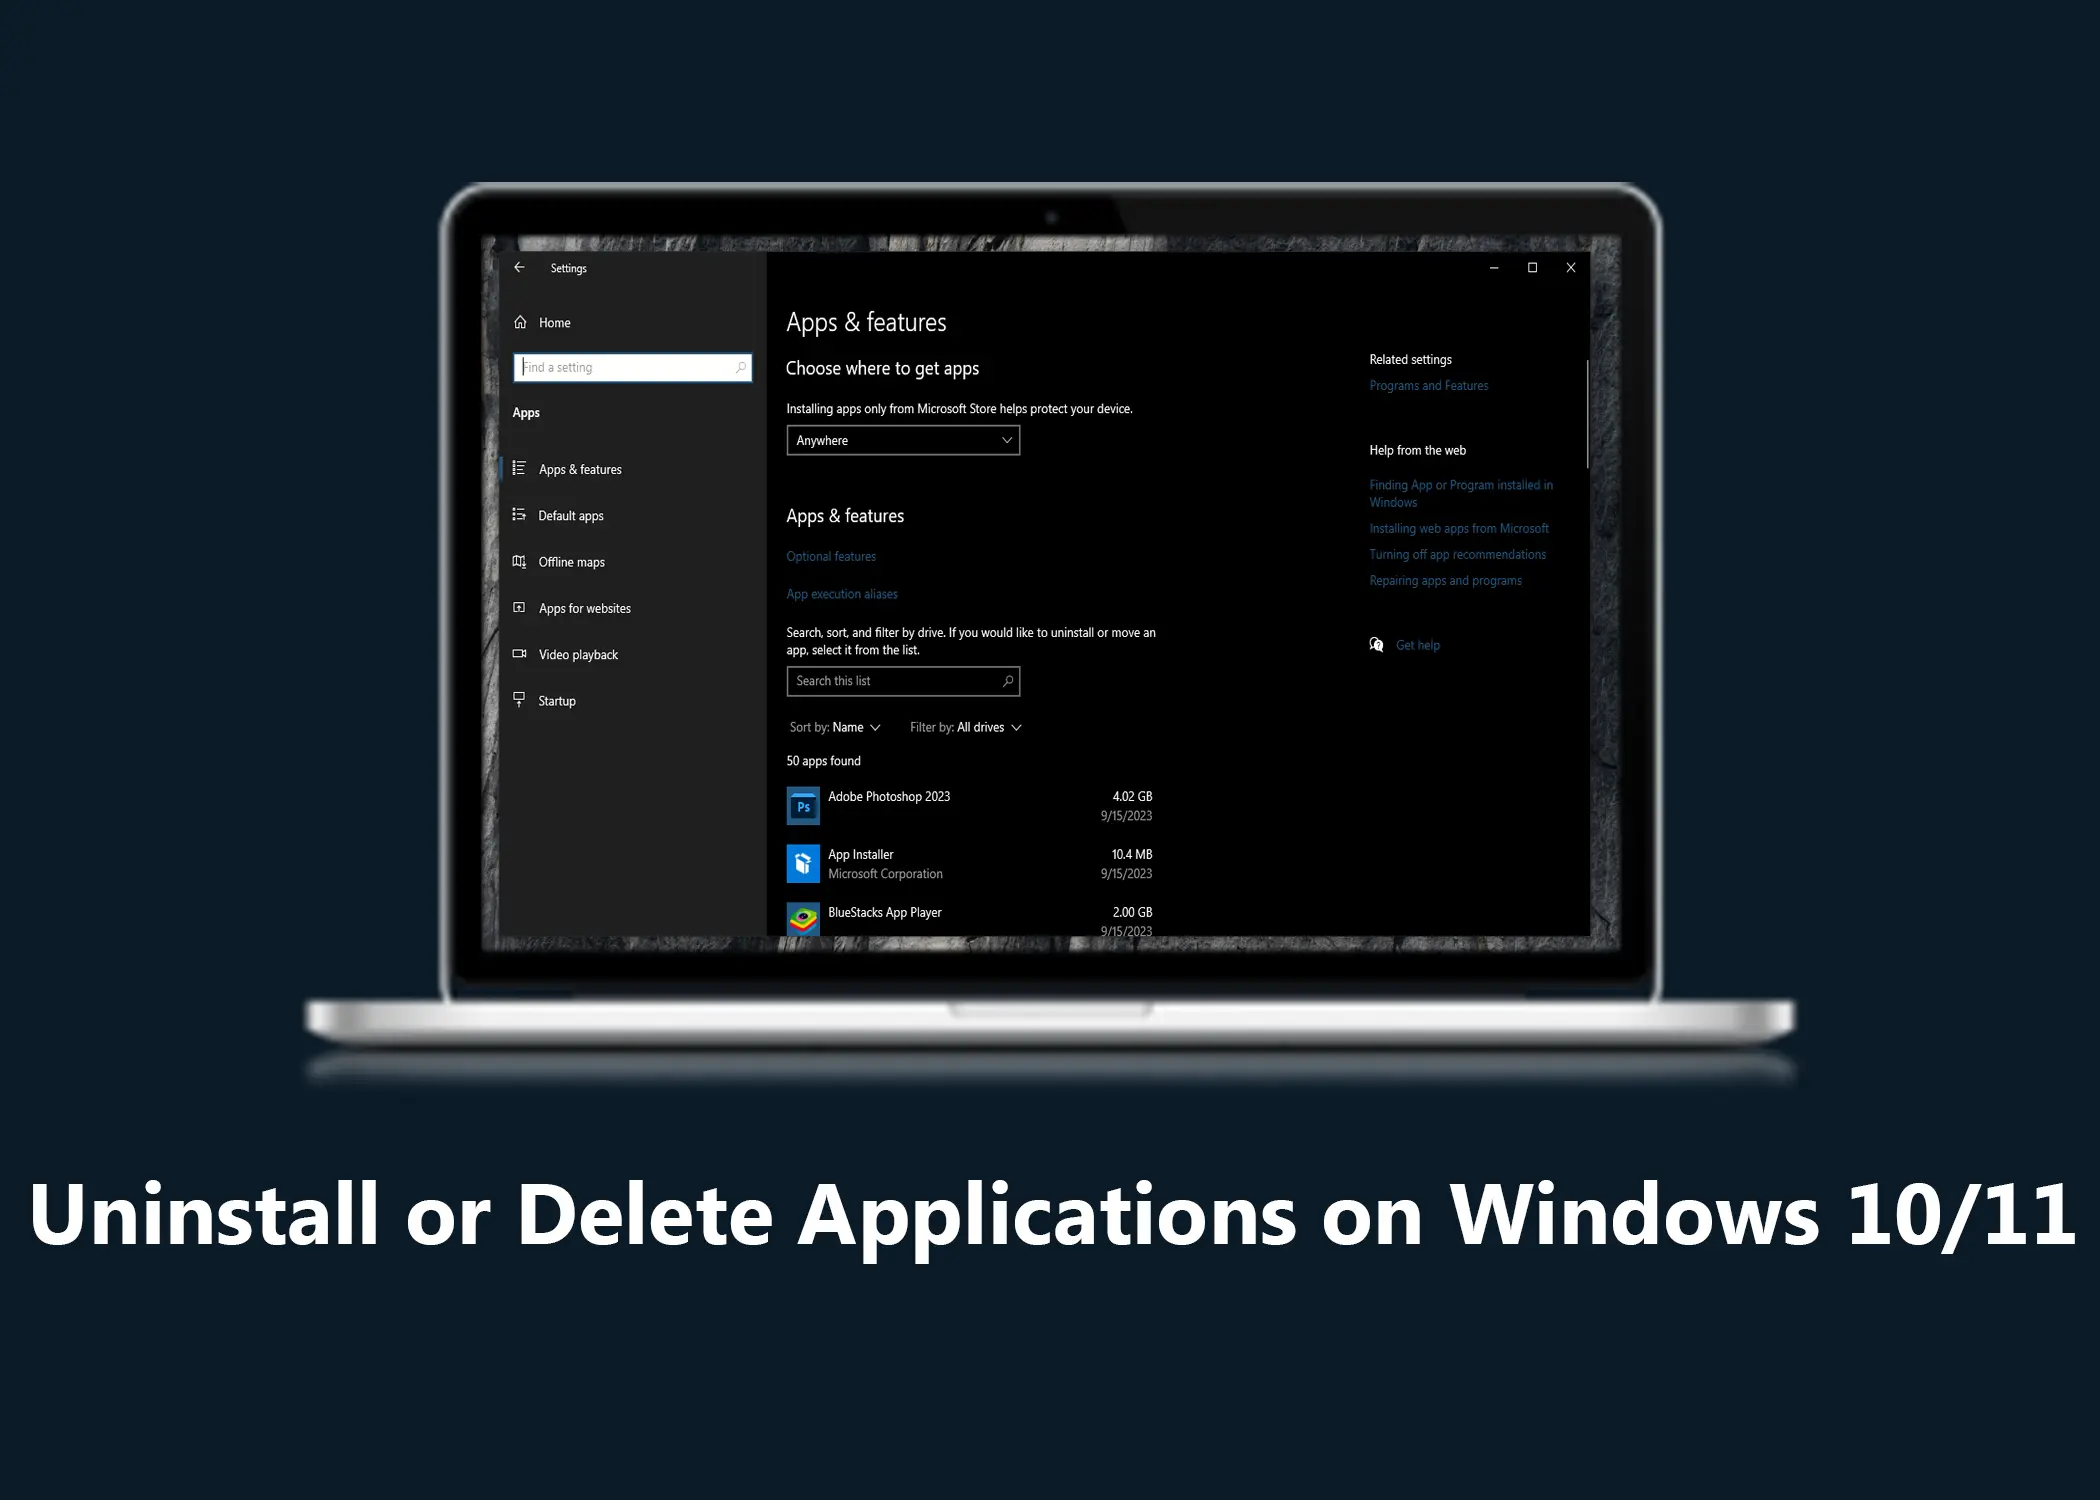 How To Uninstall or Delete Applications on Windows 10/11